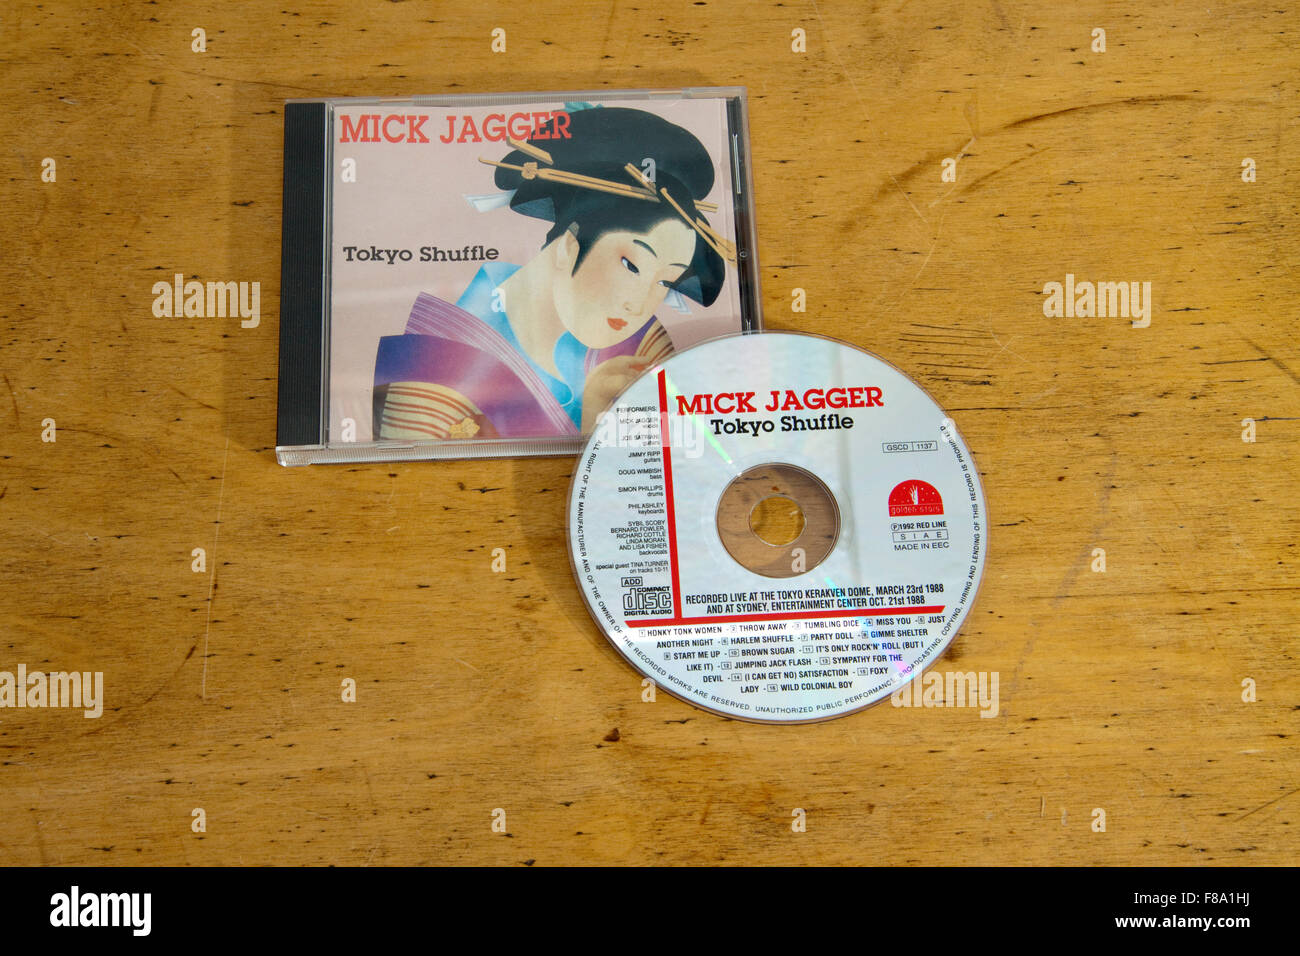 Compact disk/disc and case of Mick Jagger's 1988 live album Tokyo Shuffle Stock Photo